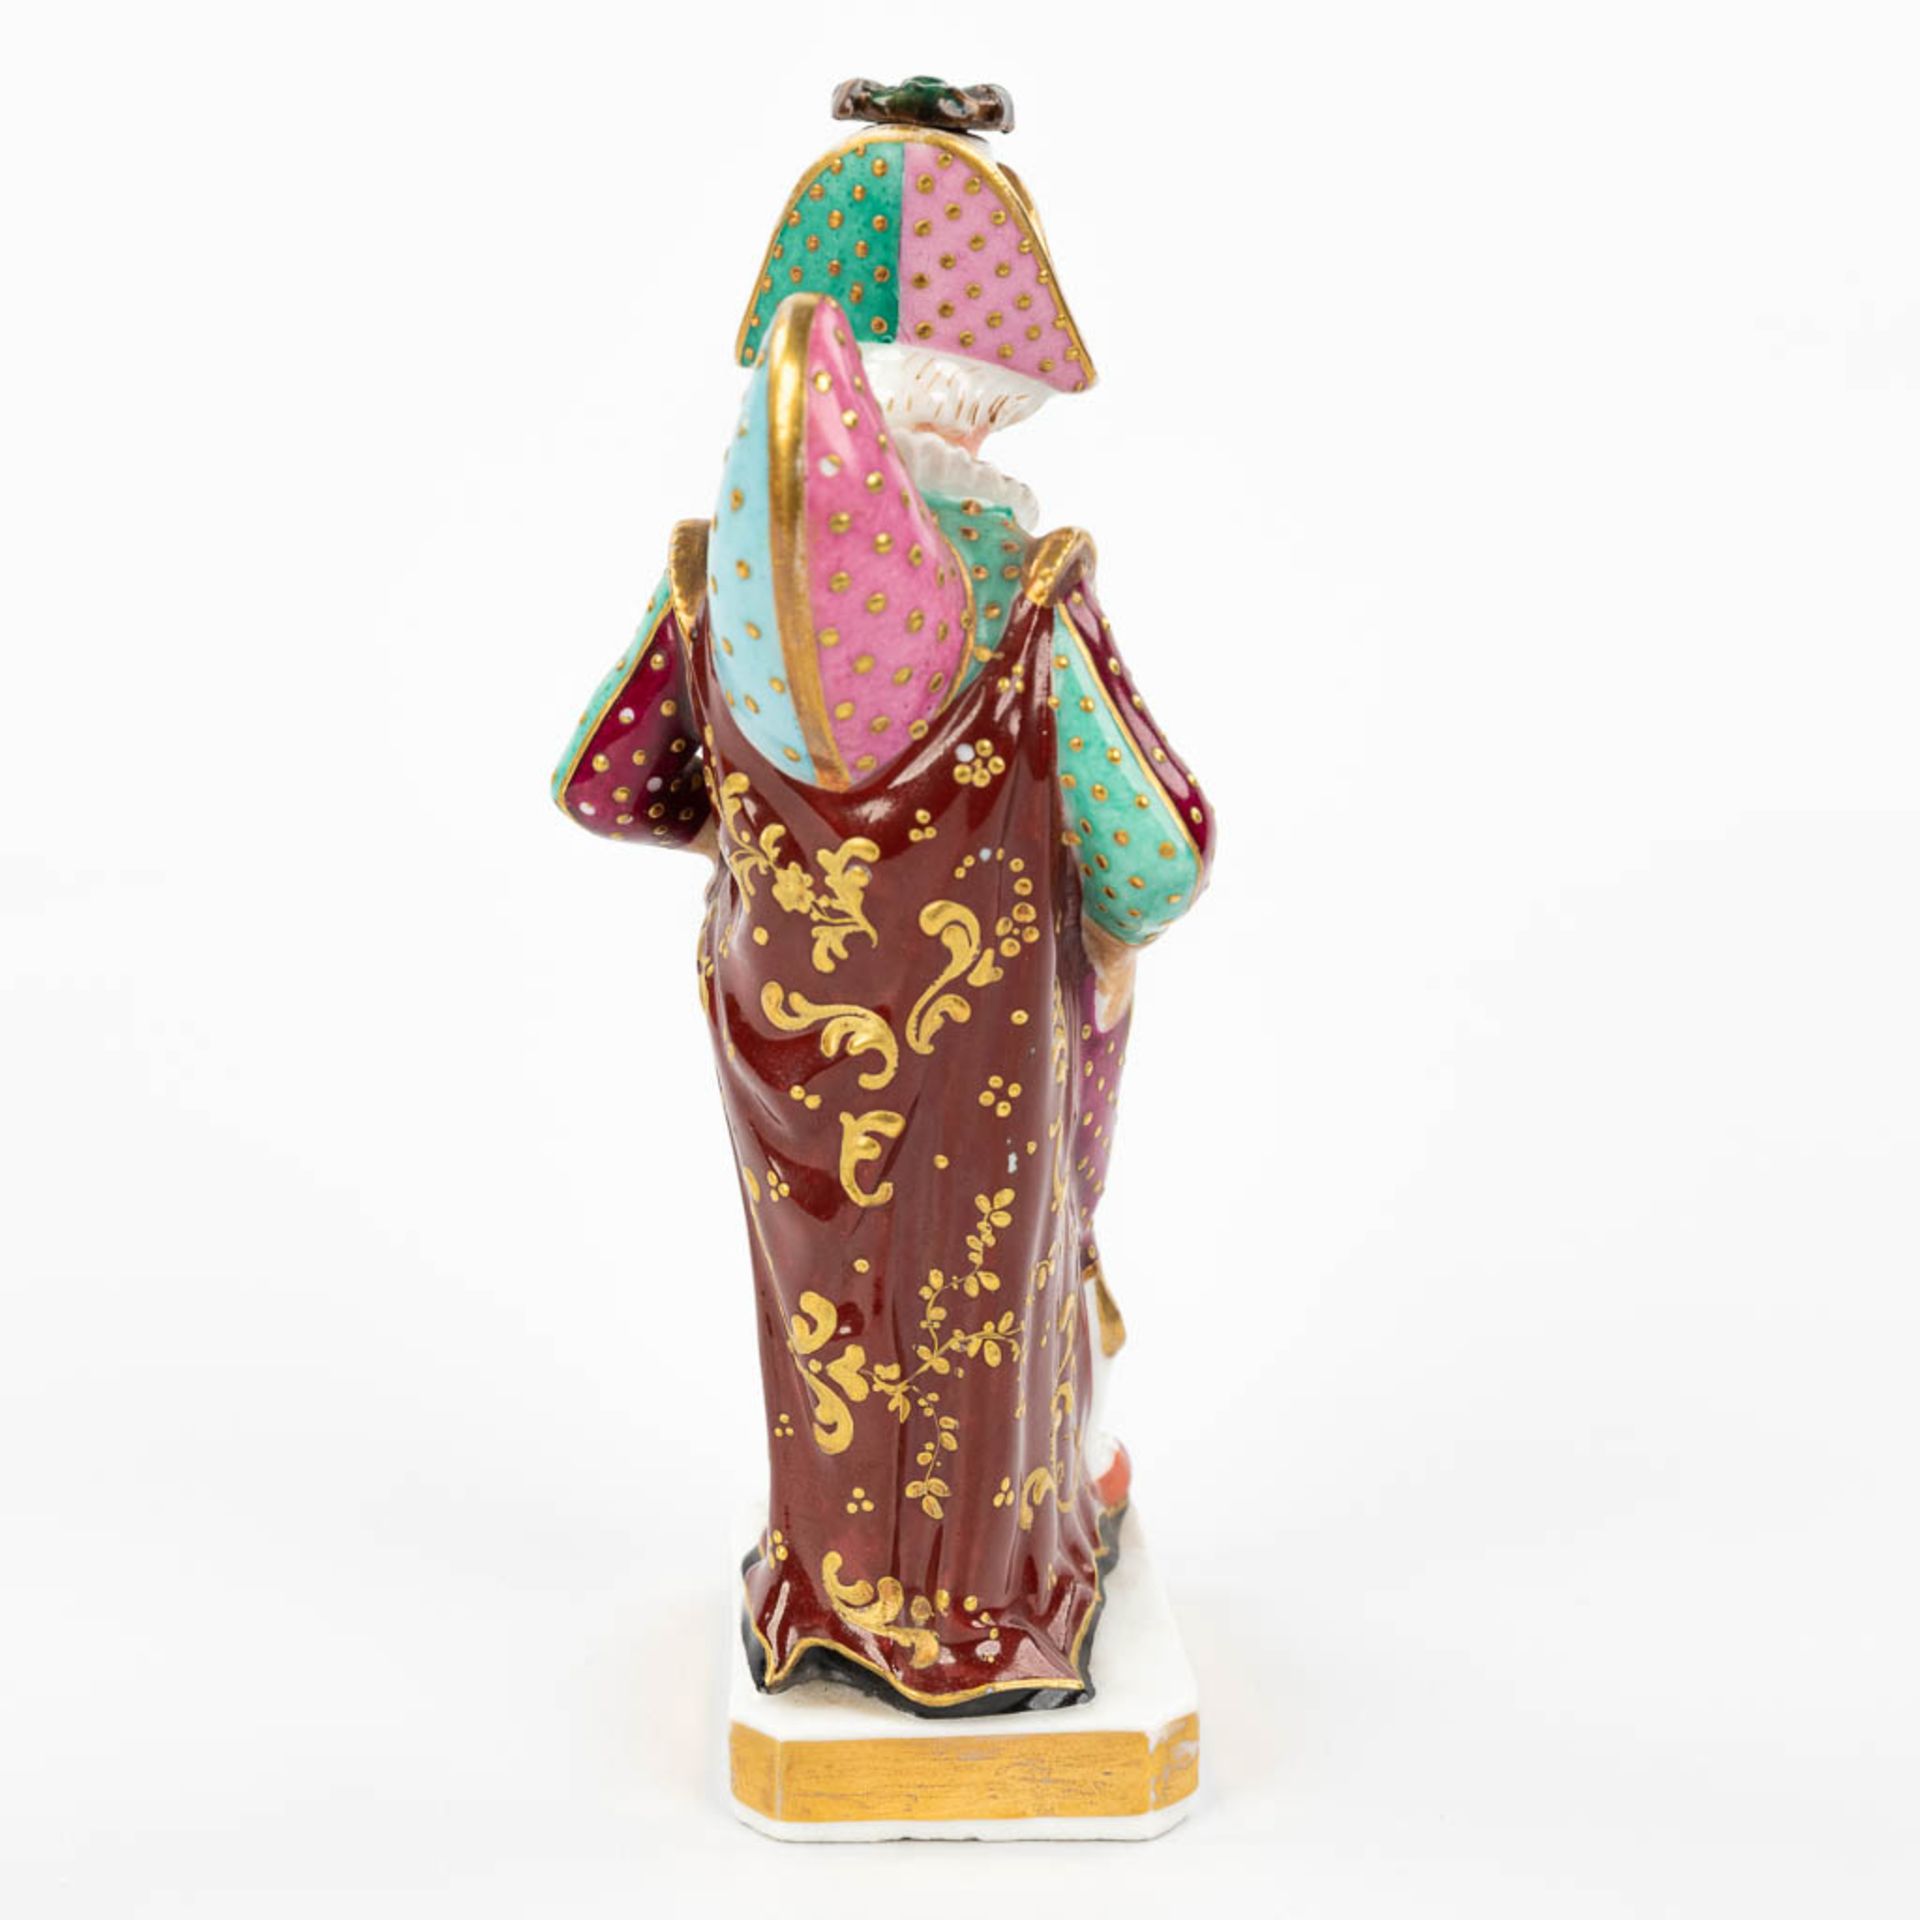 JACOB-PETIT (1796-1868) a perfume bottle in the shape of a harlequin, made of porcelain. (H:15,5cm) - Image 3 of 12